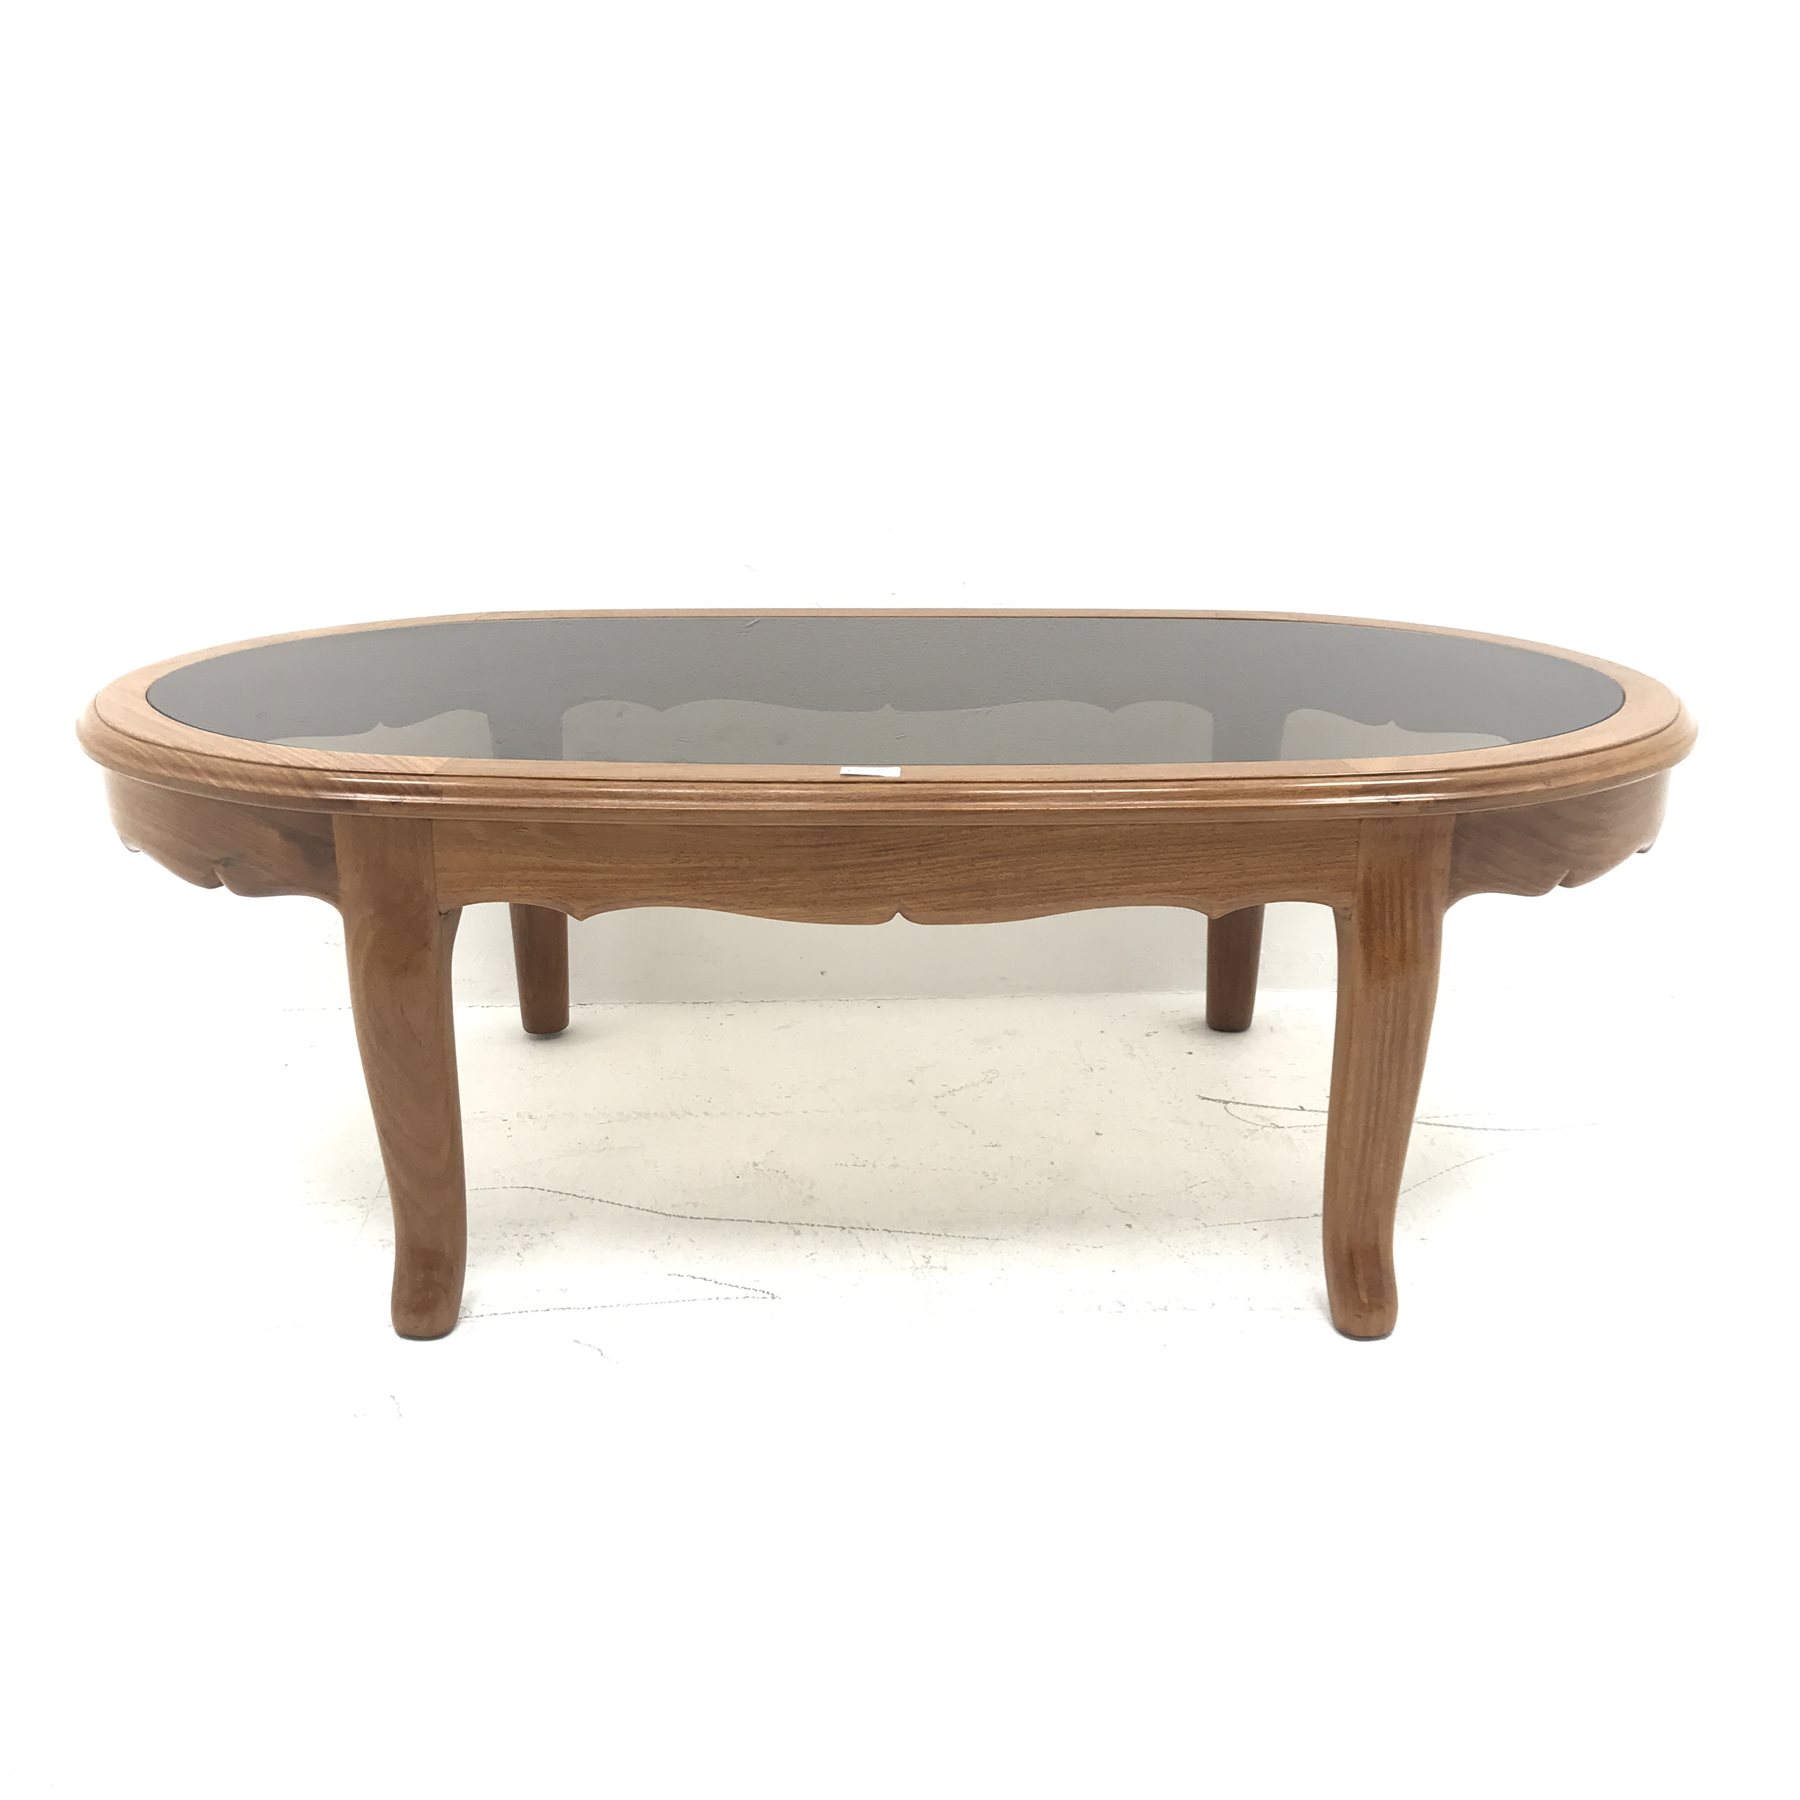 Chinese rosewood coffee table with inset glass top, cabriole legs